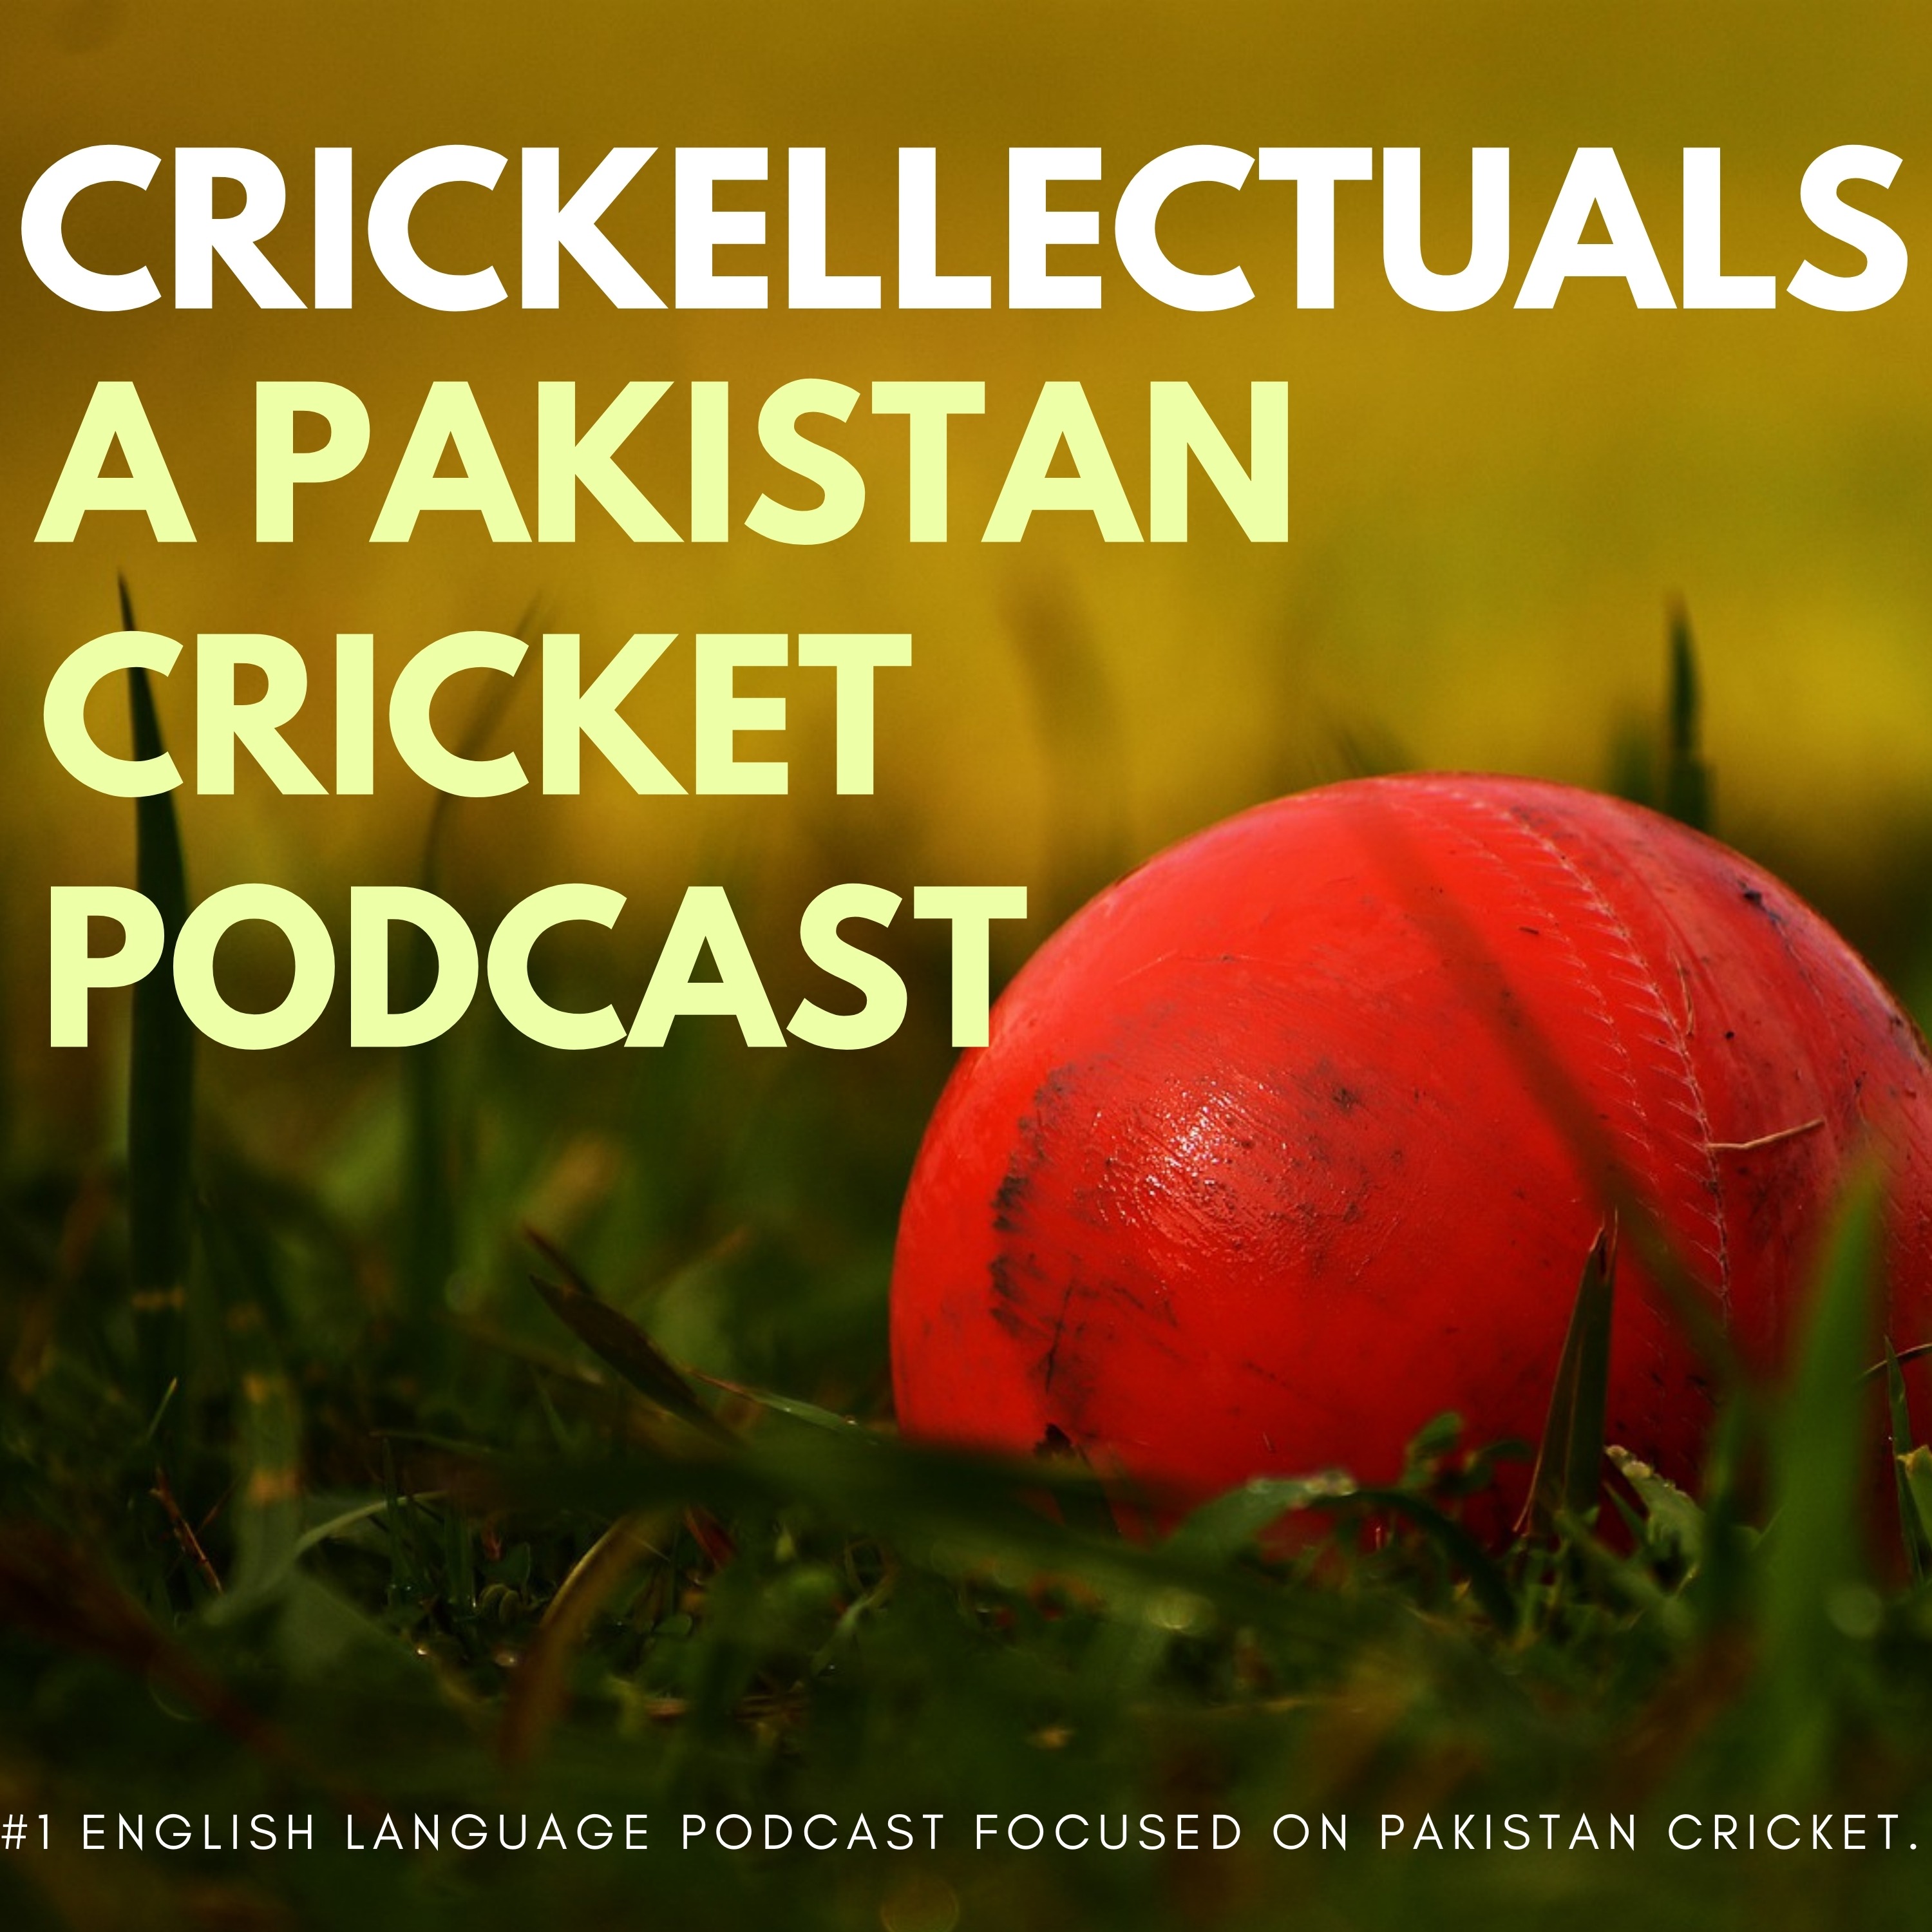 Ep.11 Will Ramiz Raja's Australian Drop-in Pitches Have an Impact on Quality of Pakistan Cricket Team?